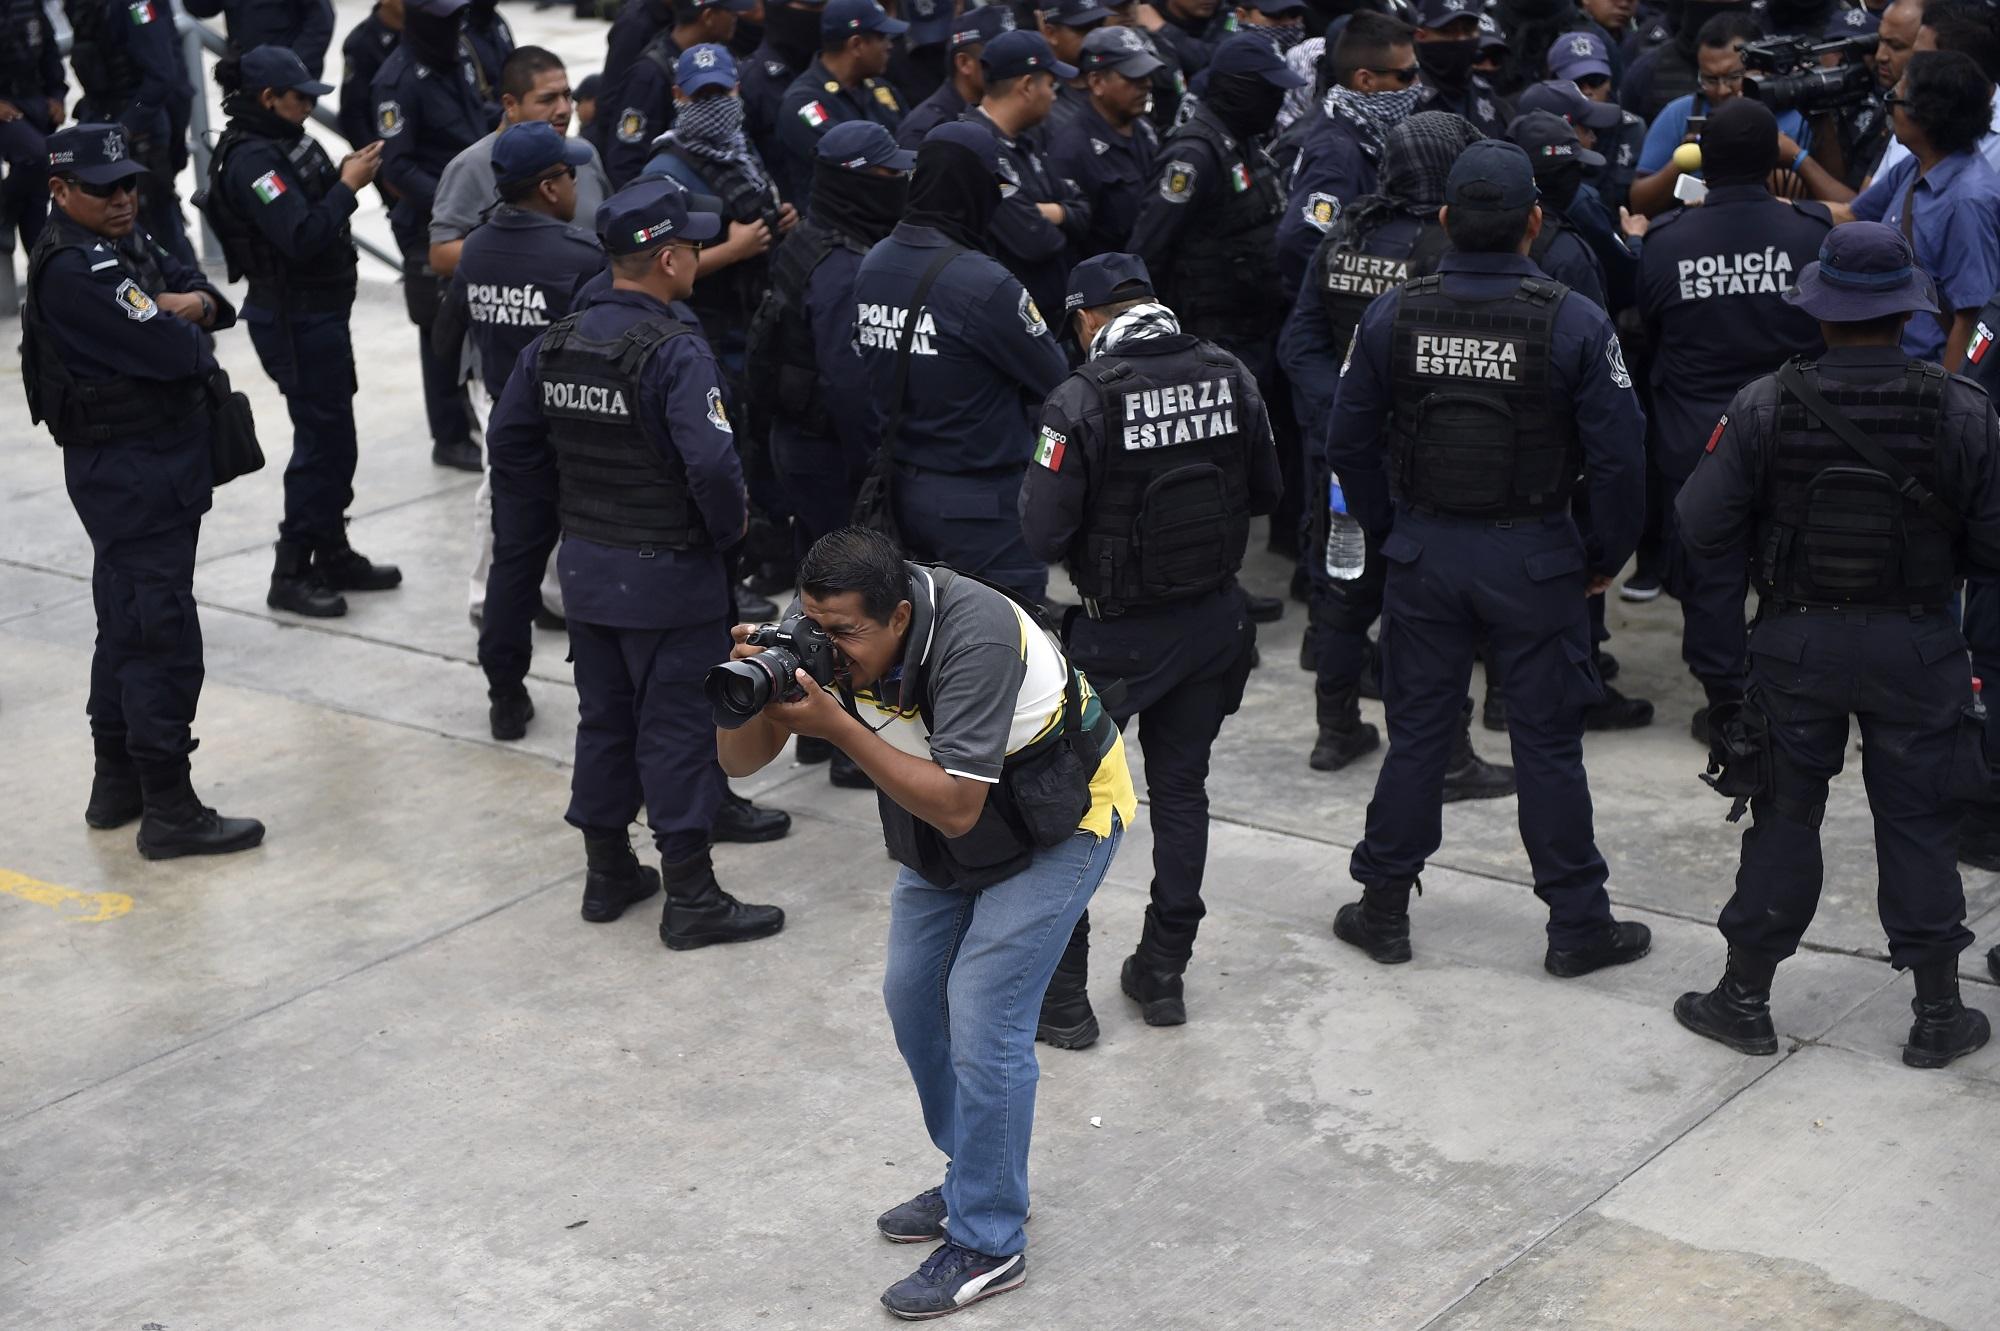 A Mexican photojournalist works during a protest of police officers in Chilpancingo, Guerrero state, Mexico, on May 30, 2017. In line with journalists murdered and disappeared in Mexico since the militarization of the war against drugs, there is an increasing and 